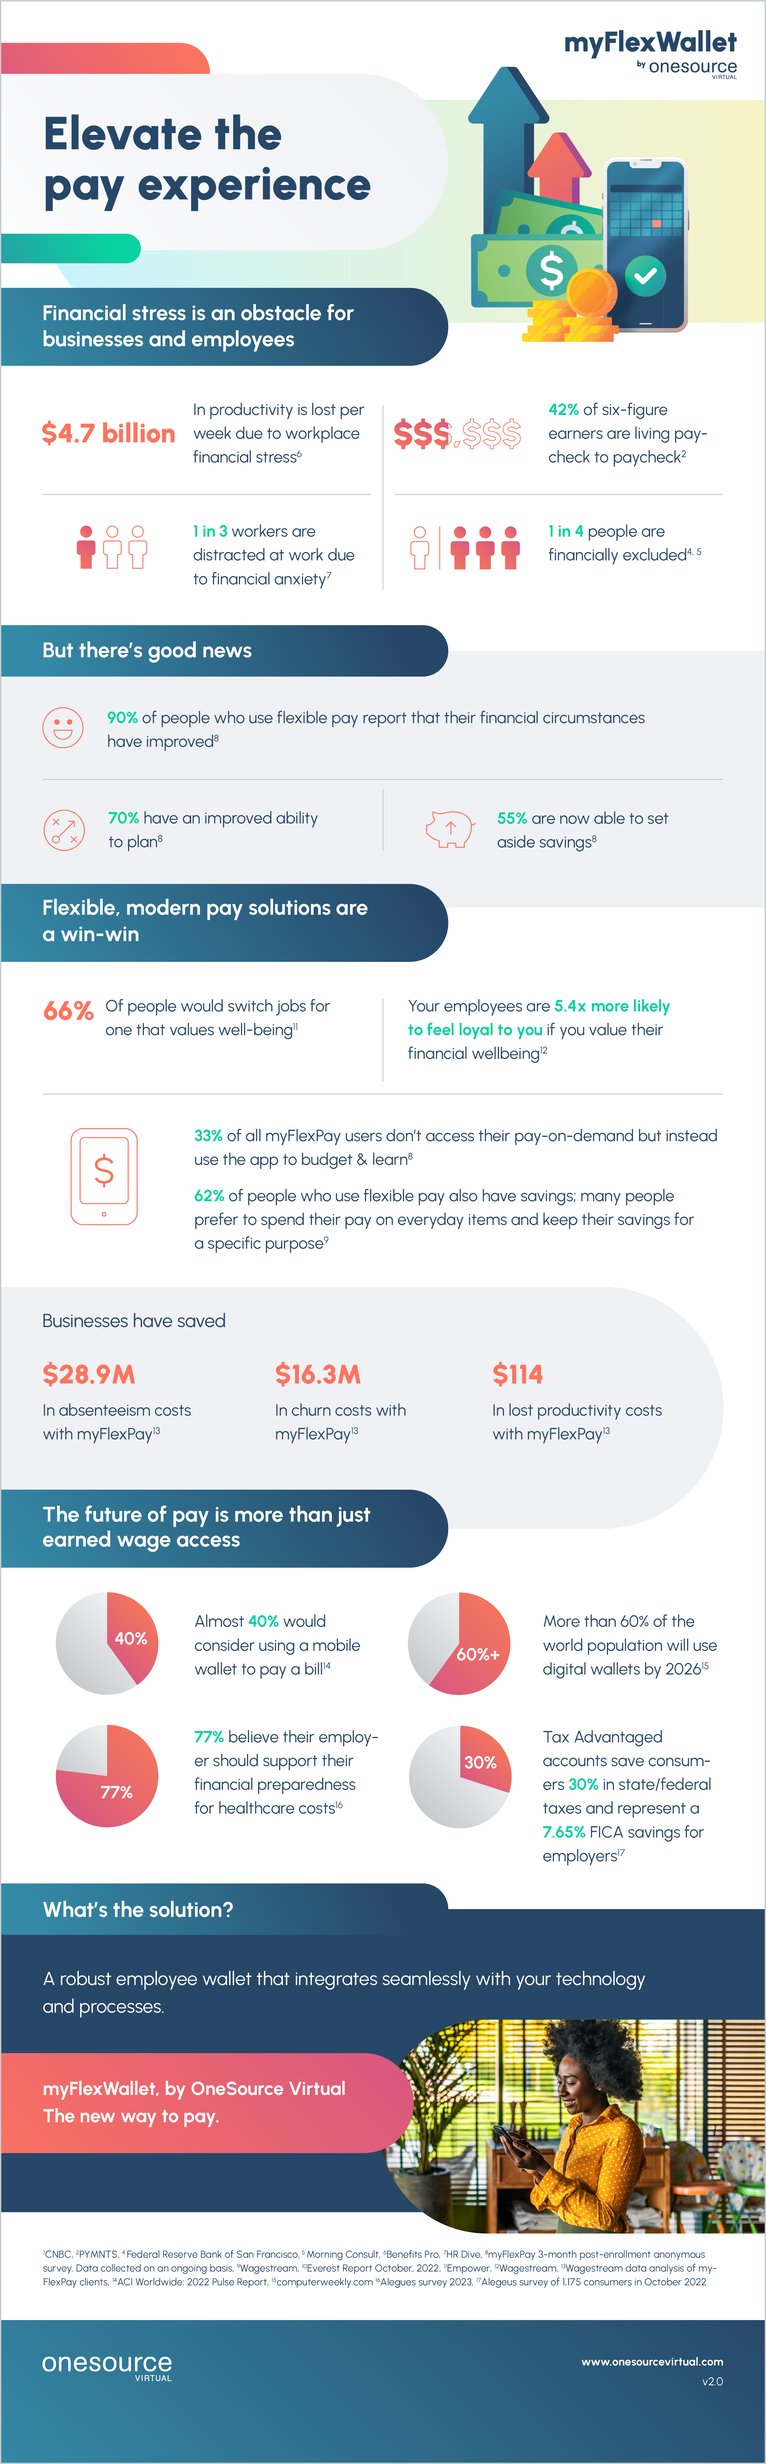 infographic_mfw_elevate_the_pay_experience_v2.0